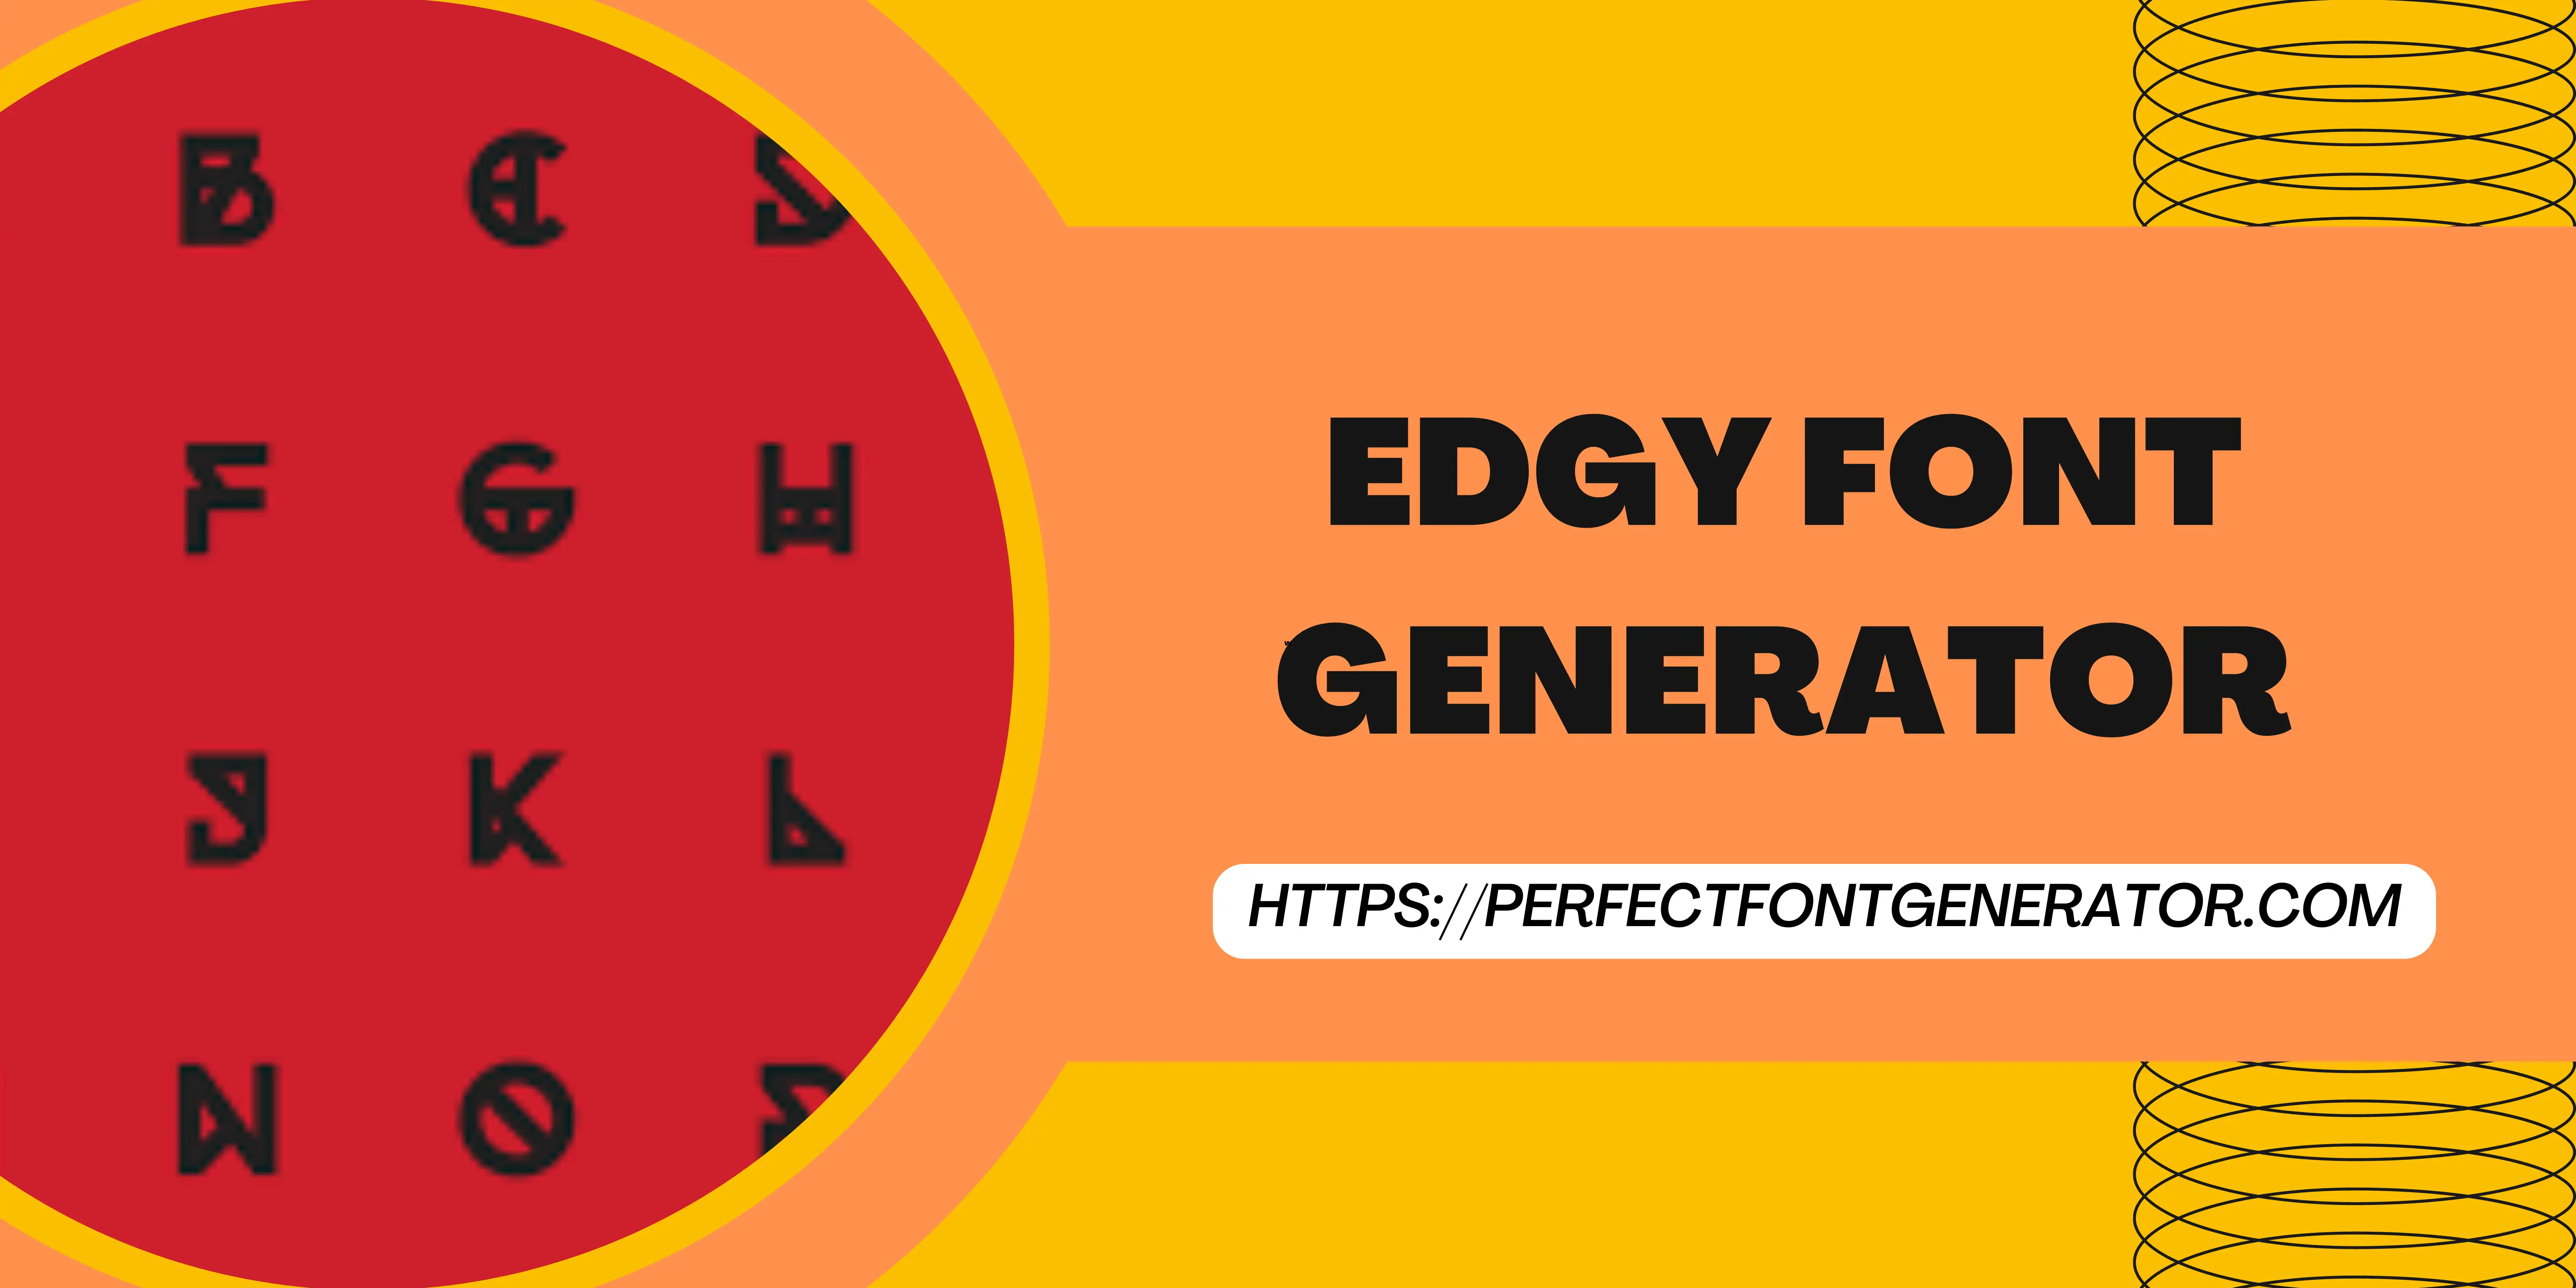 Edgy Font Generator With Cool Symbols - Online Copy Paste